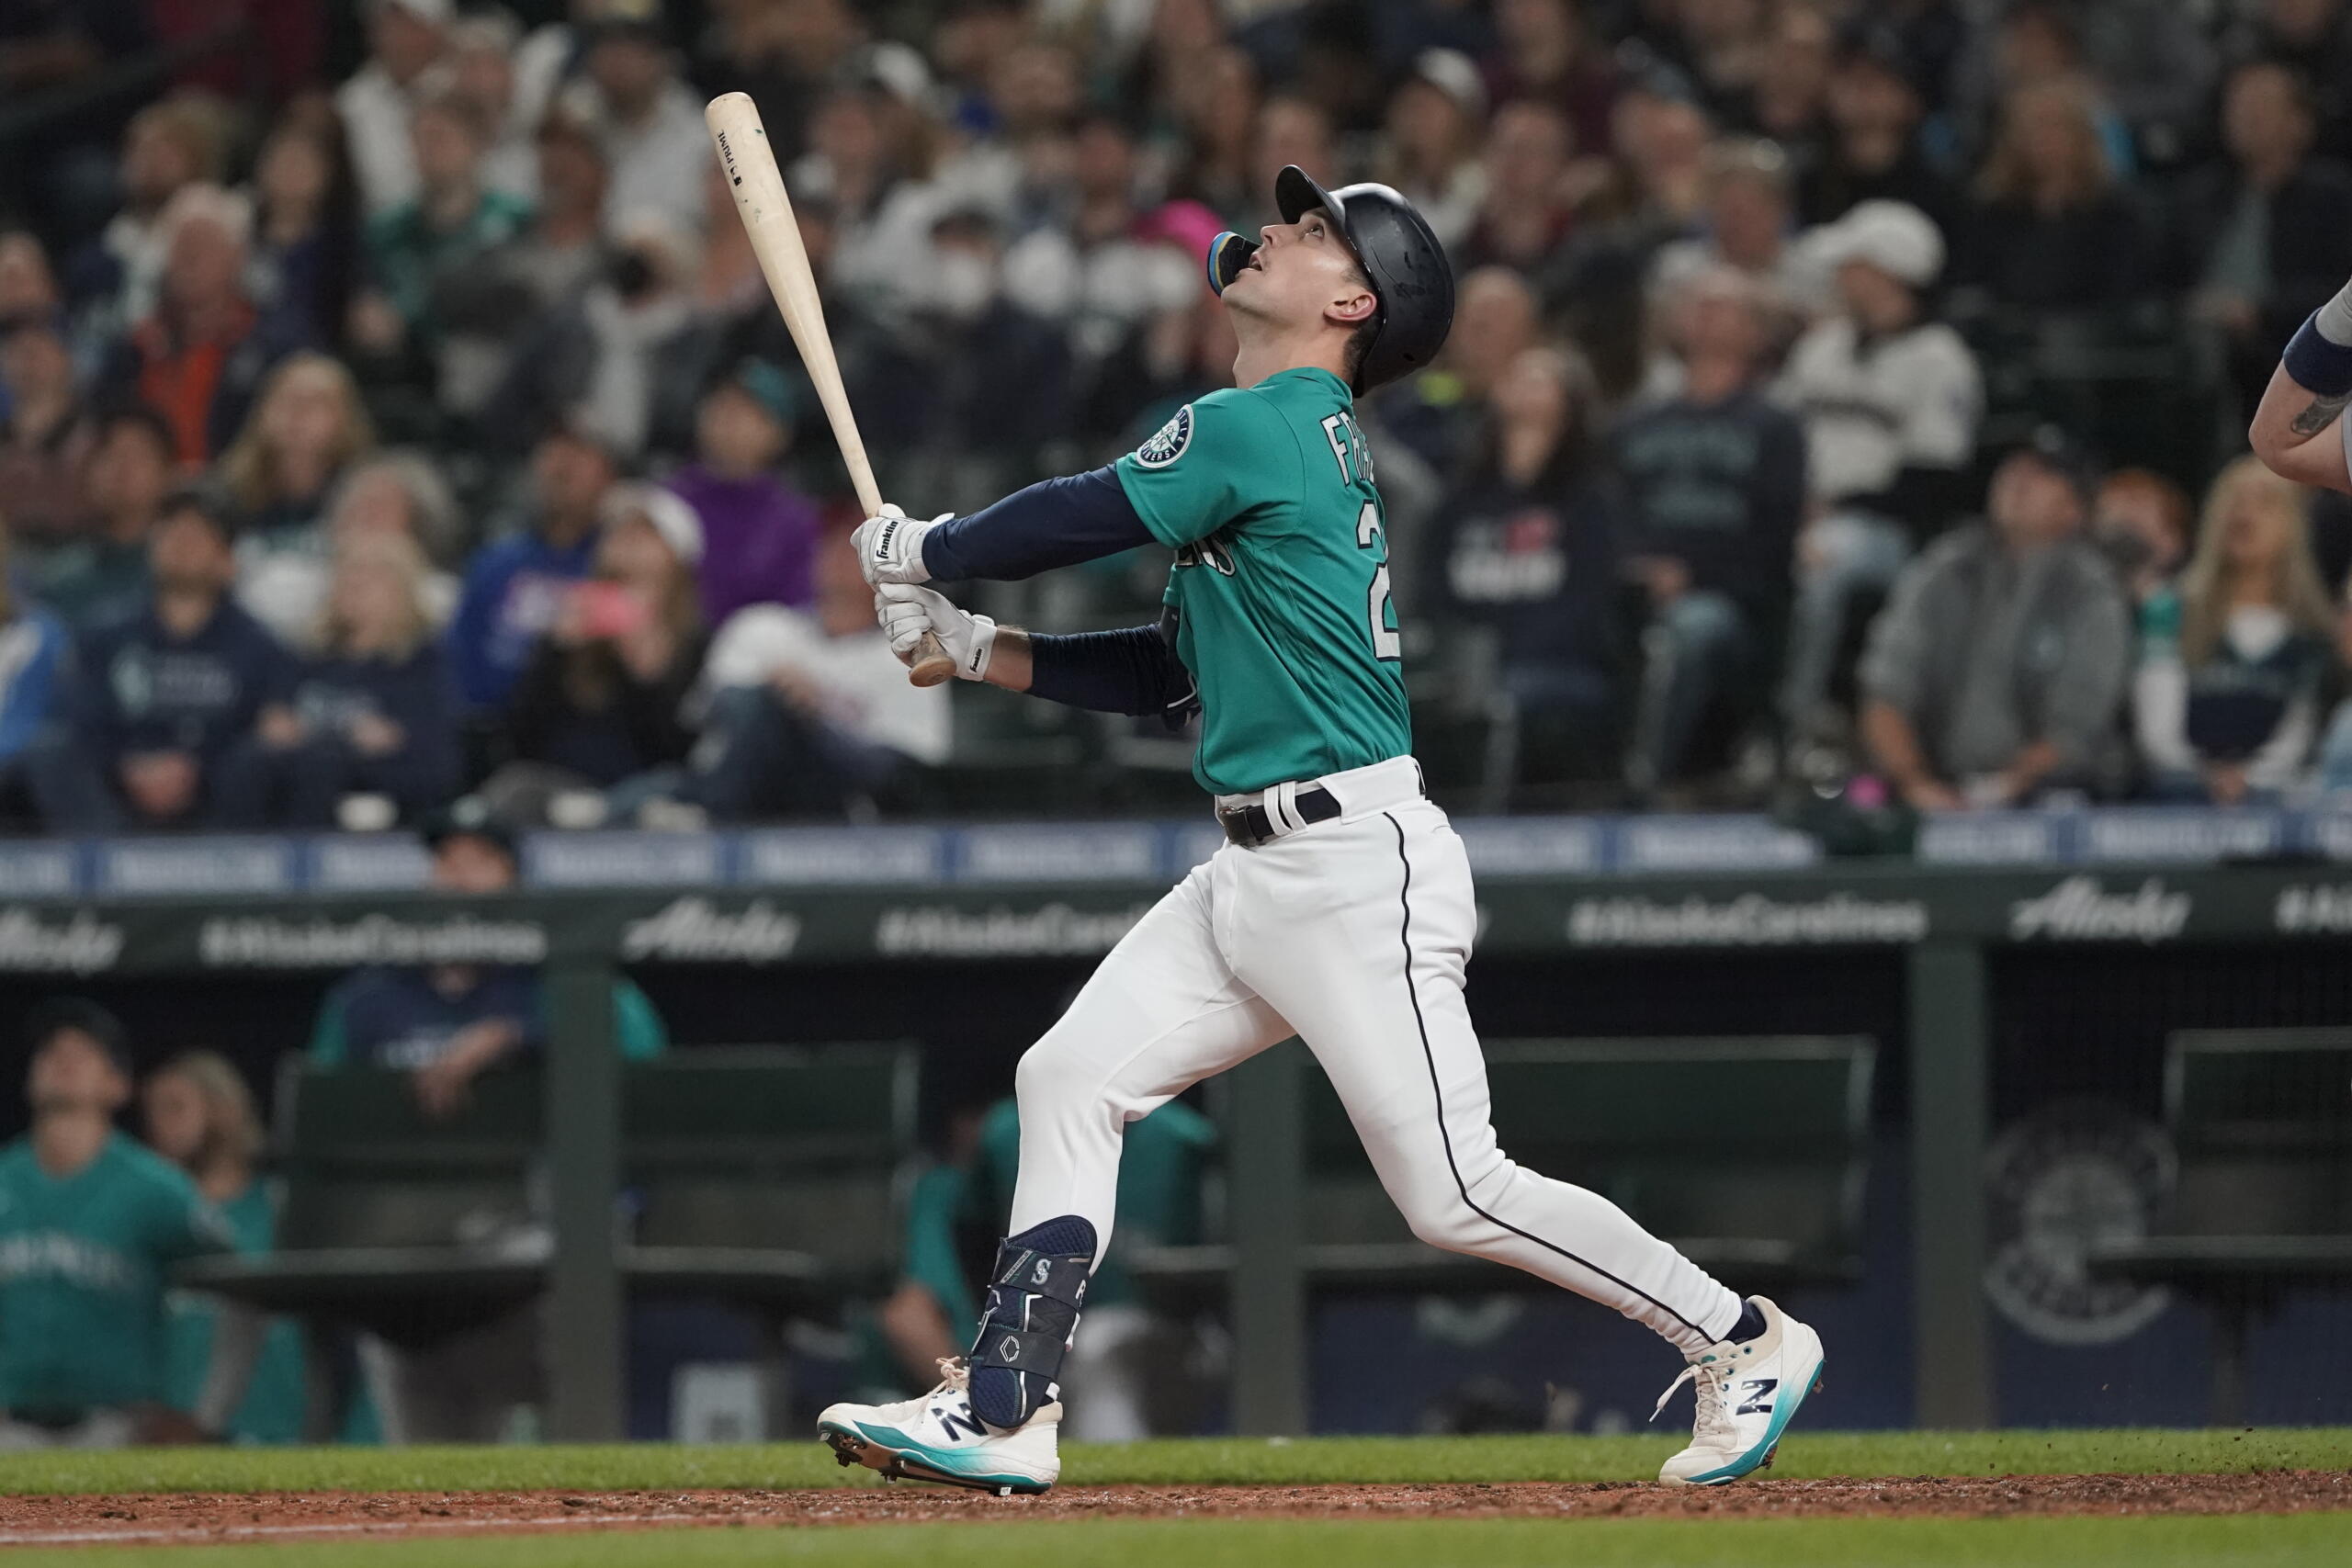 After 14 straight, Mariners drop pair - The Columbian